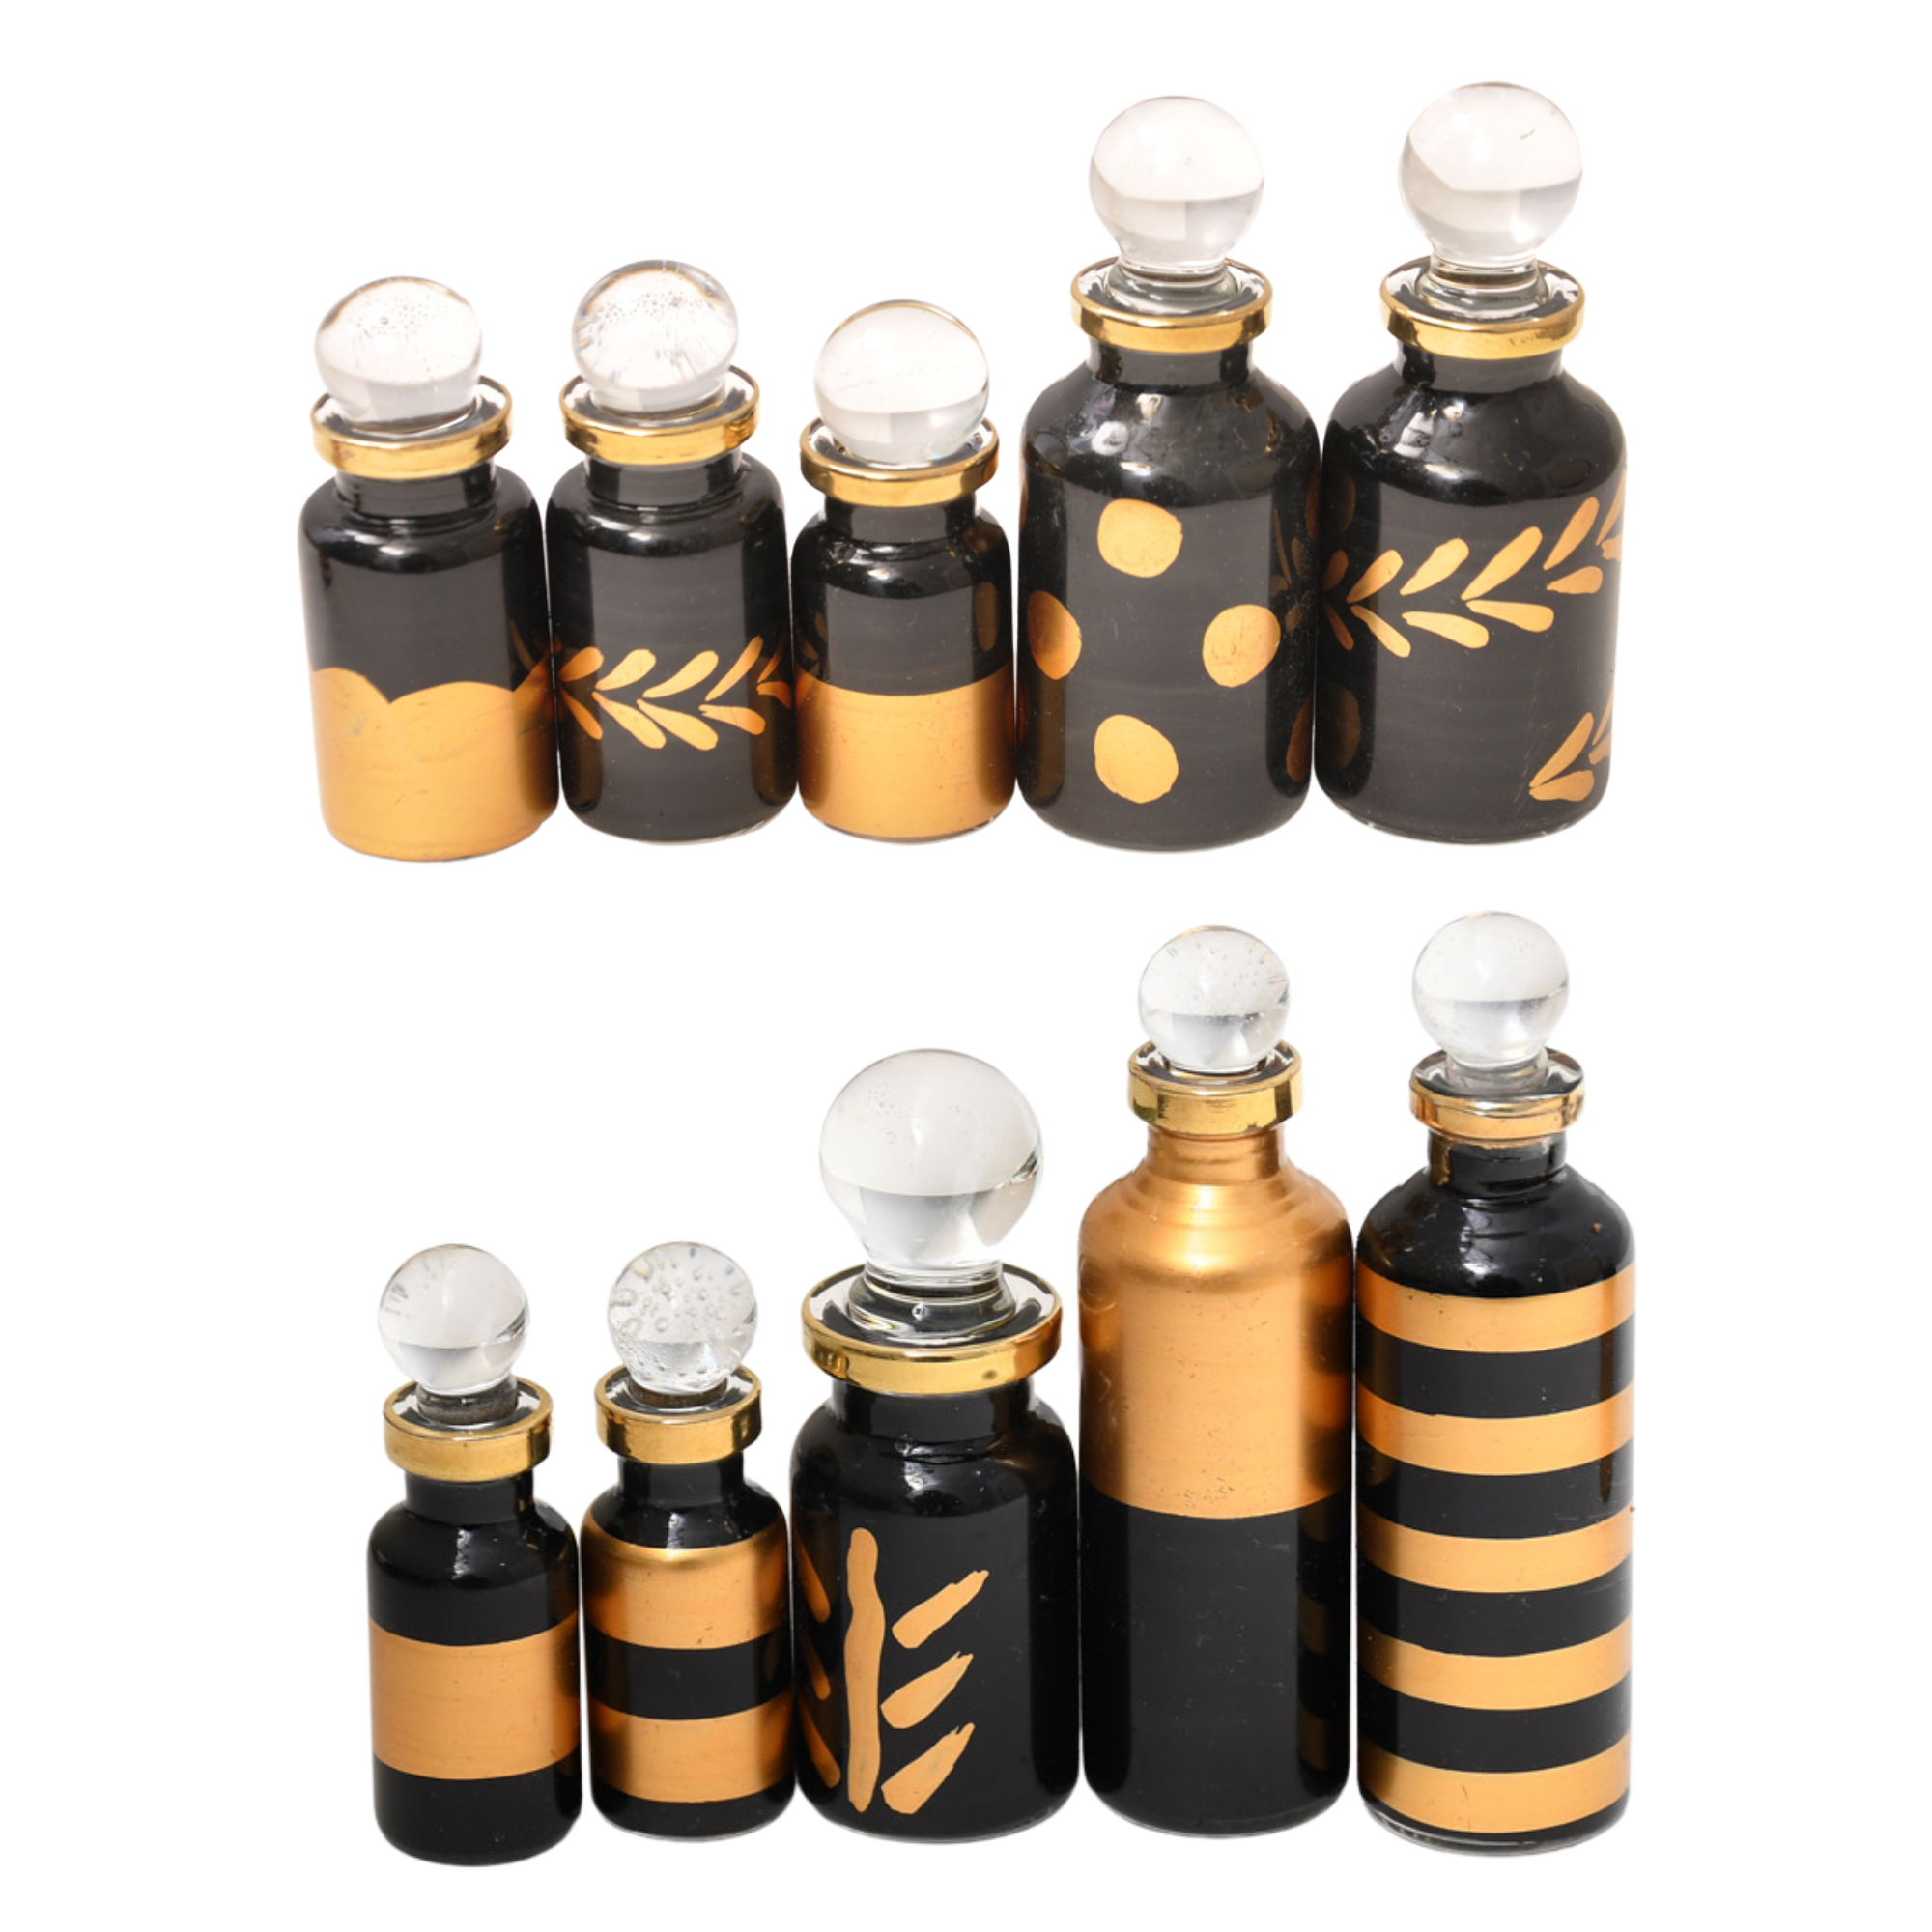 Genie Blown Glass Miniature Perfume Bottles for Perfumes and Essential Oils, Set of 10 Decorative Vials, Each 2" High (5cm), Black & Gold